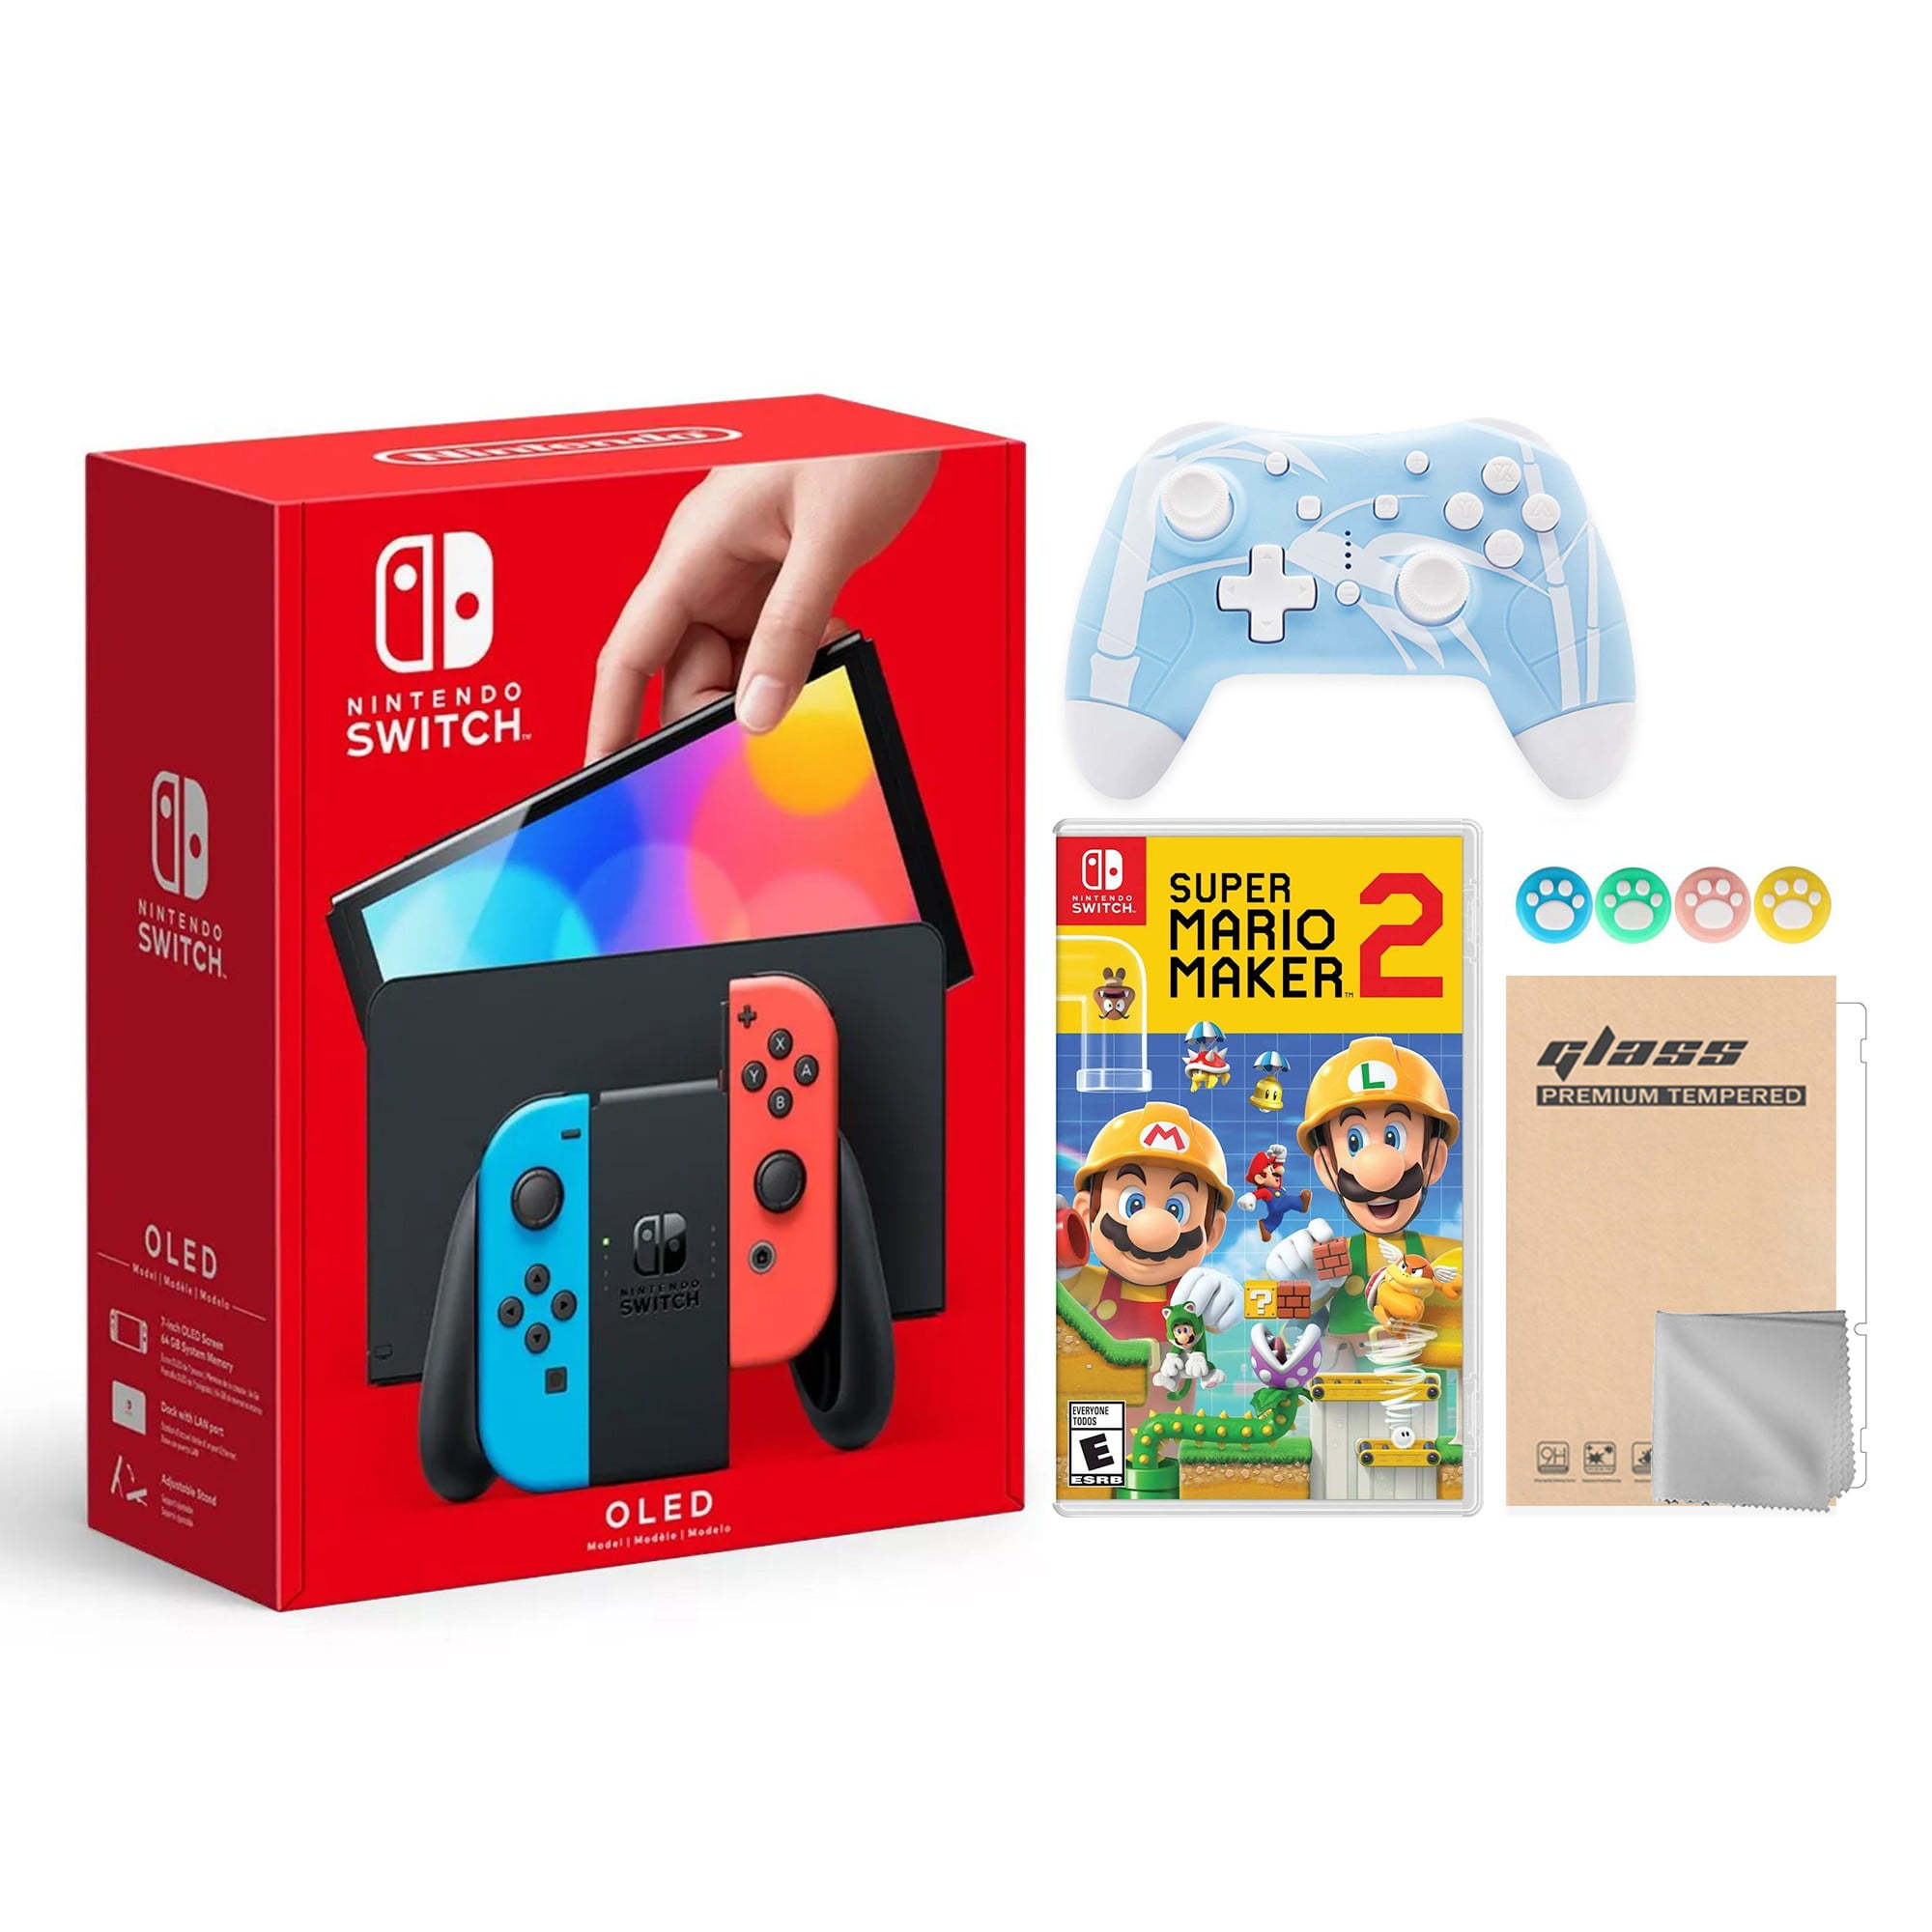 Nintendo Switch OLED Model Neon Red and Blue Joy Con 64GB Console 